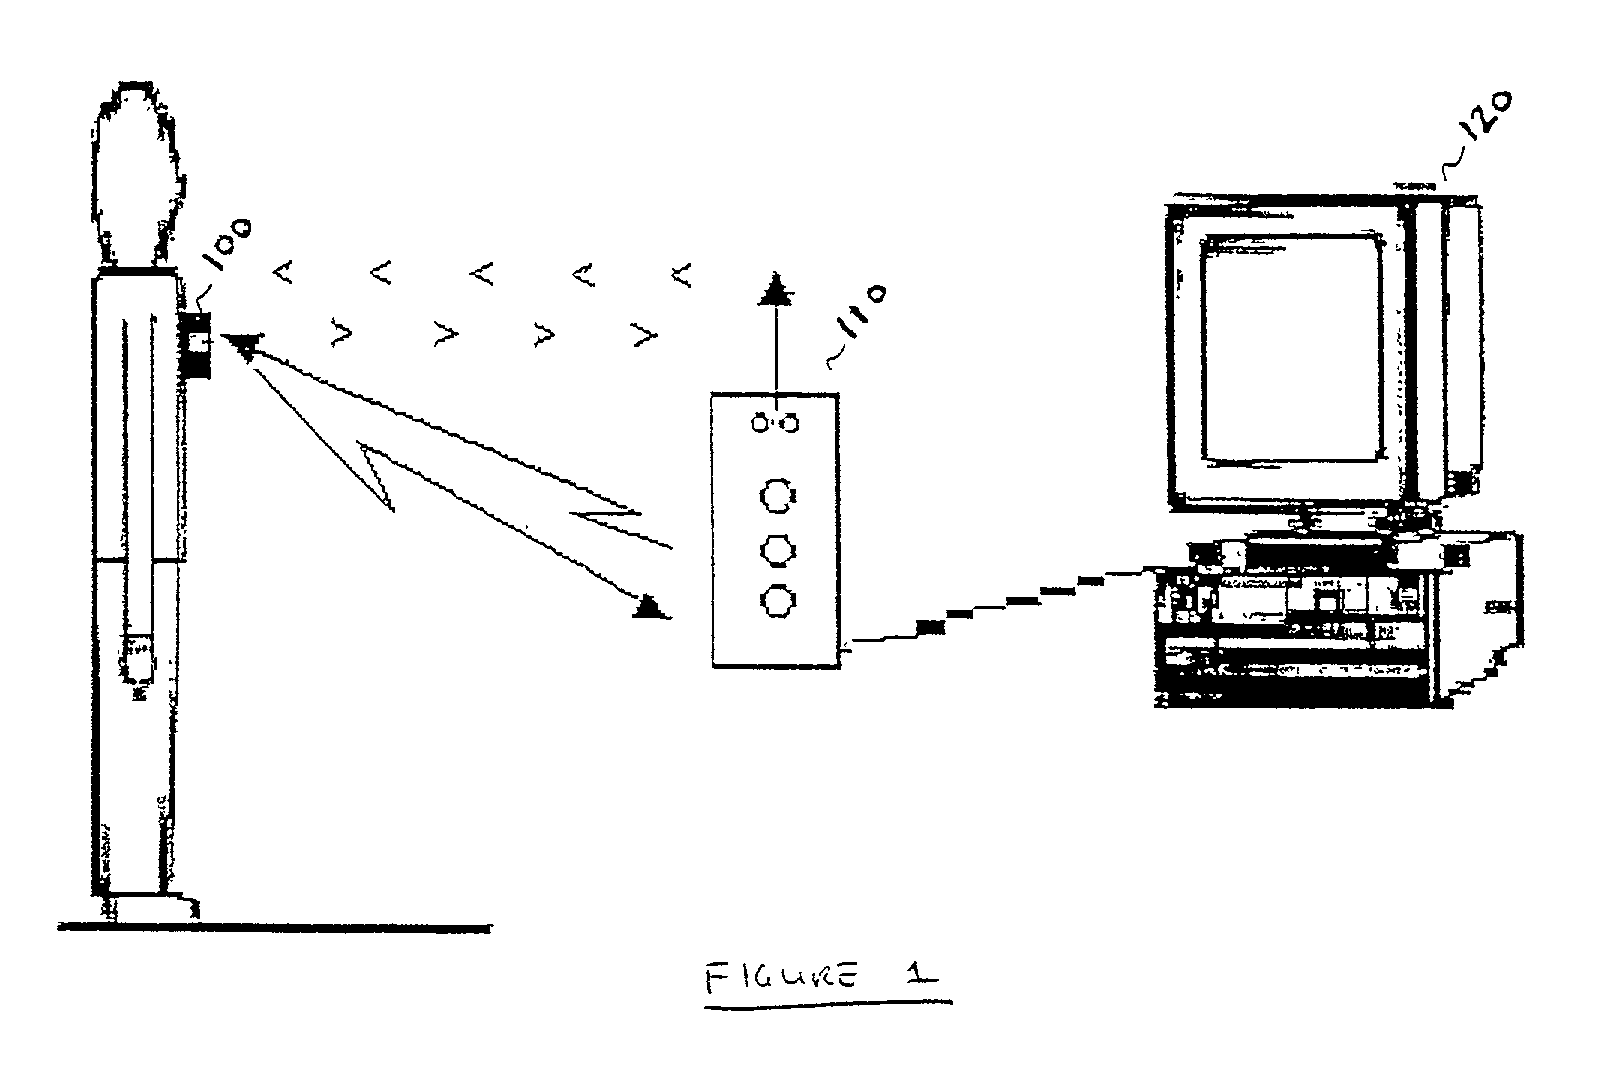 Portable wireless access to computer-based systems